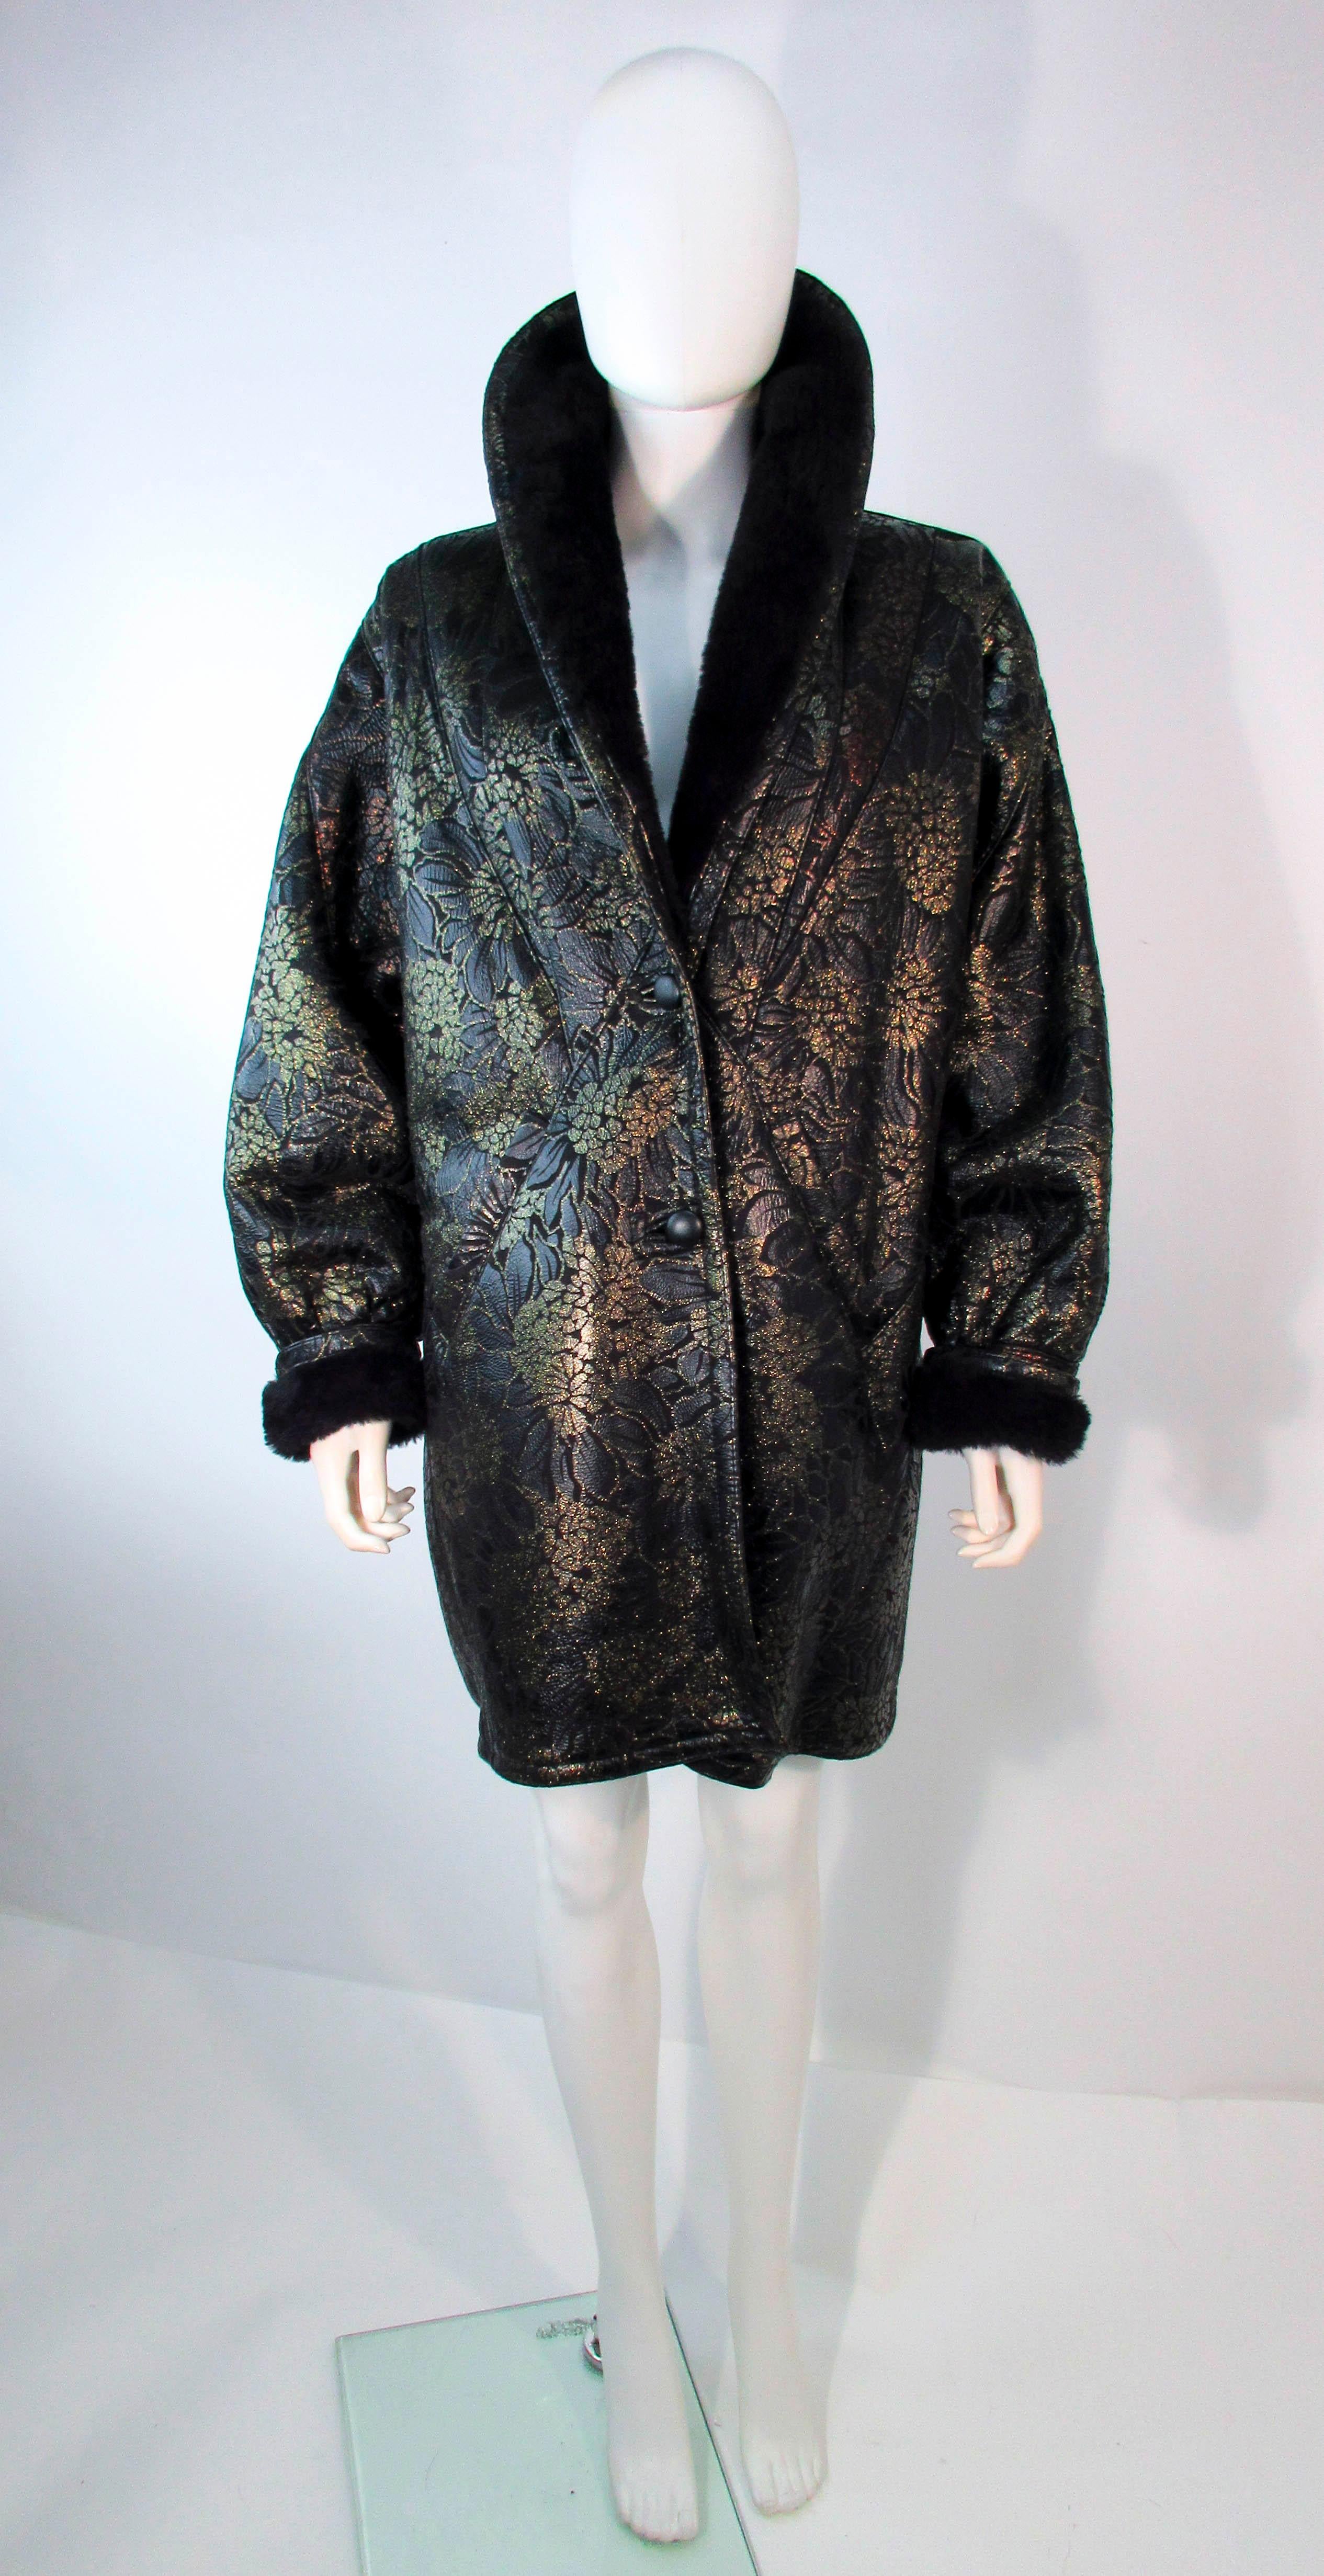 This is a stunning design by Adrienne Landau. The coat is composed of a black patterned leather with a metallic multi-color floral shearling coat. There are two pockets and the sleeves can be cuffed. There are center front button closures. In